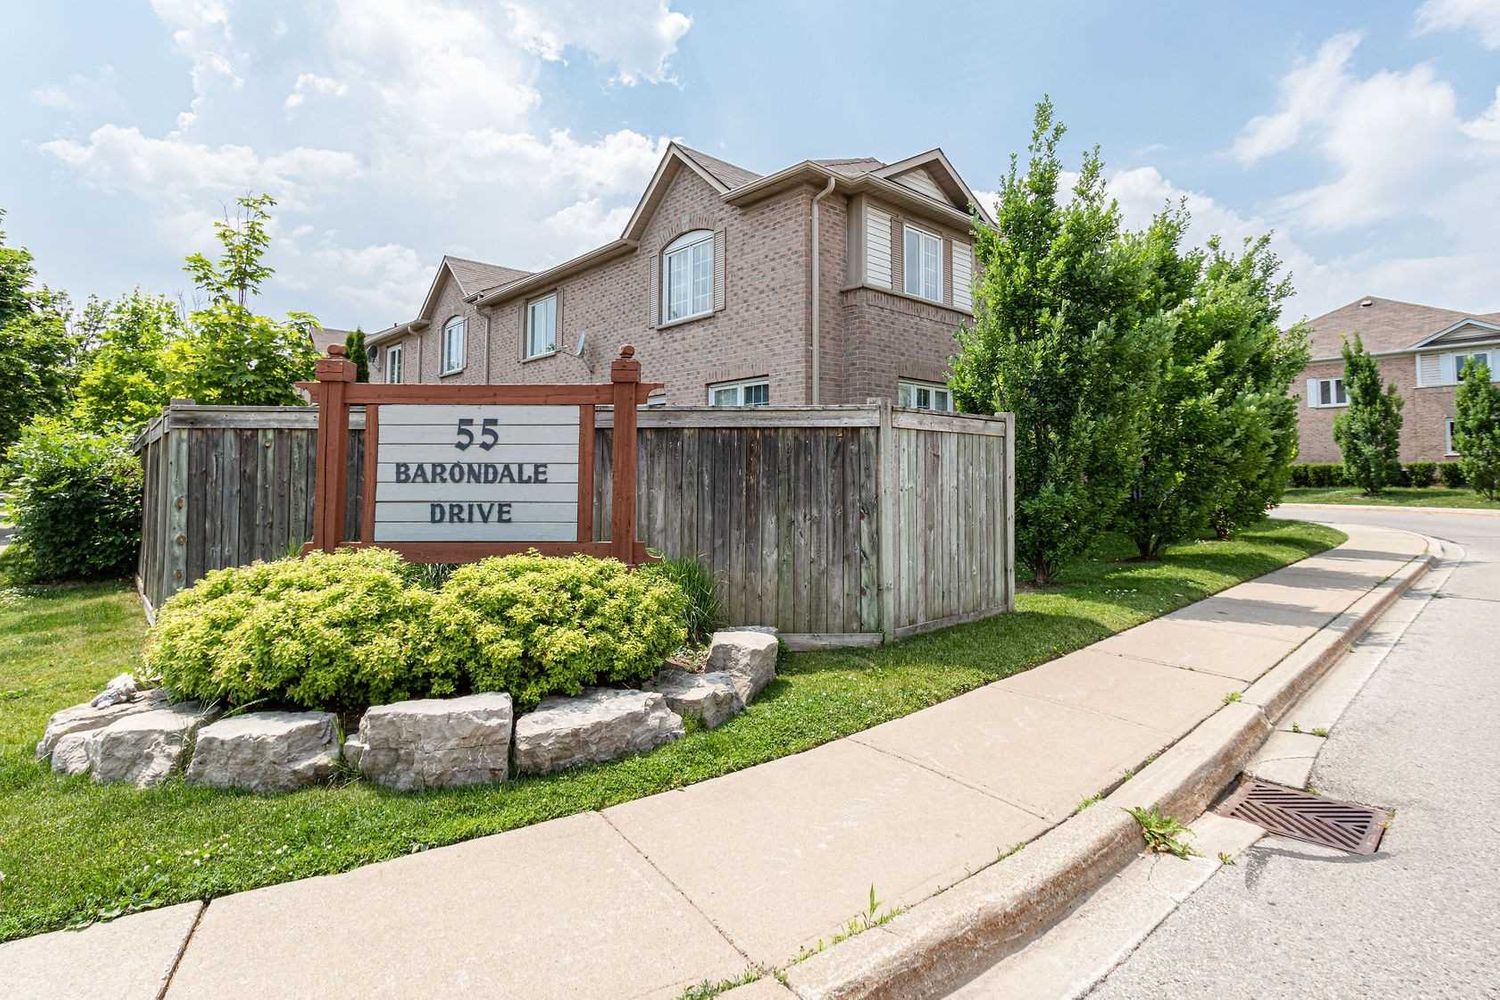 55 Barondale Drive. 55 Barondale Drive Townhomes is located in  Mississauga, Toronto - image #1 of 2